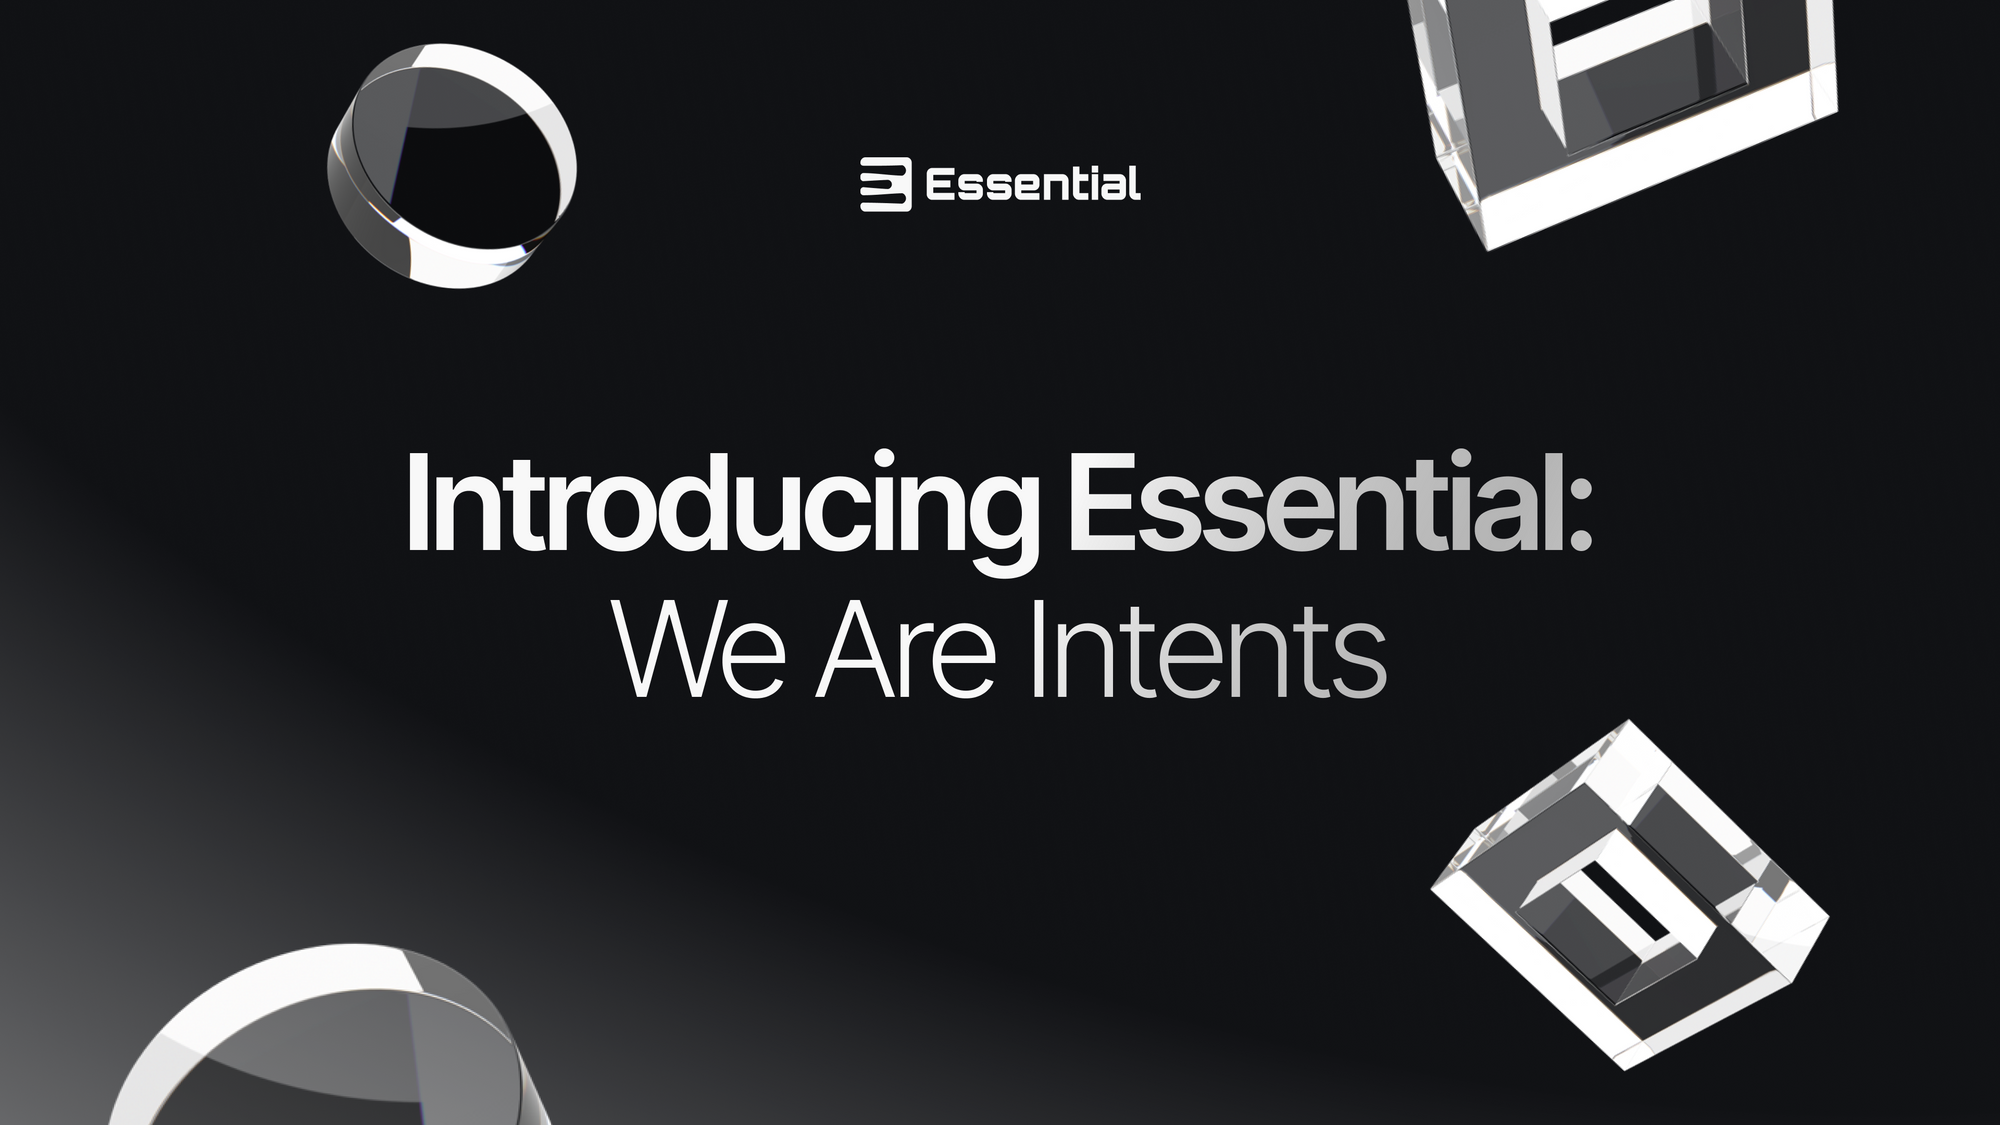 Introducing Essential: We Are Intents